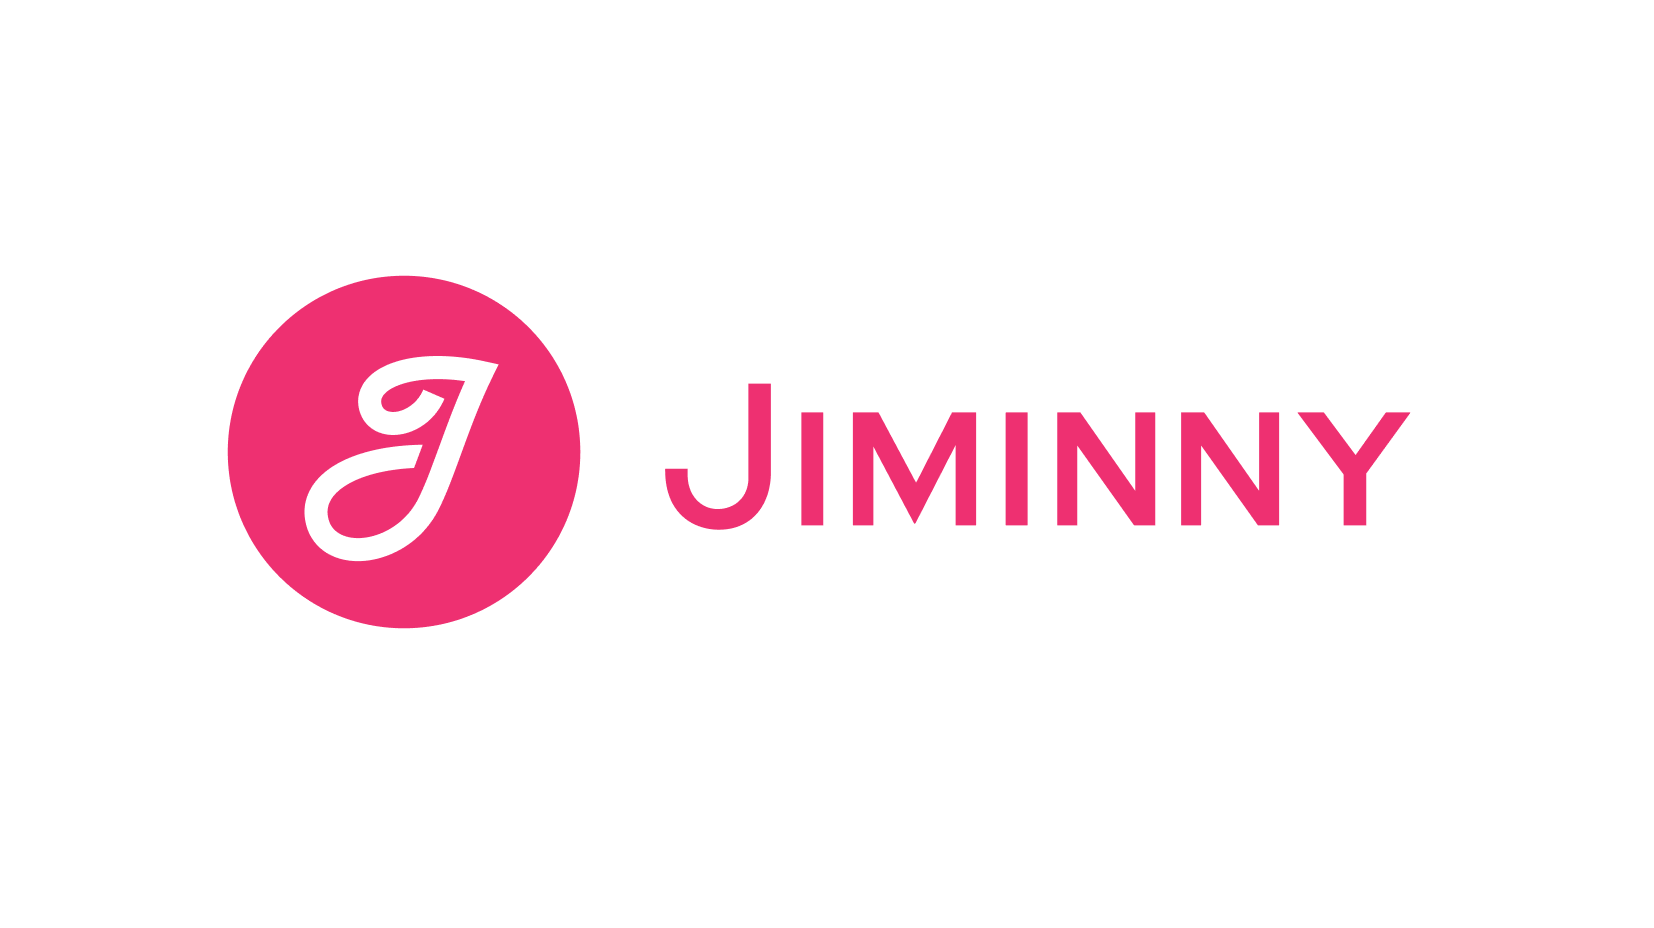 Tech & Product DD | Growth | Code & Co. advises Kennet Partners on Jiminny, Inc